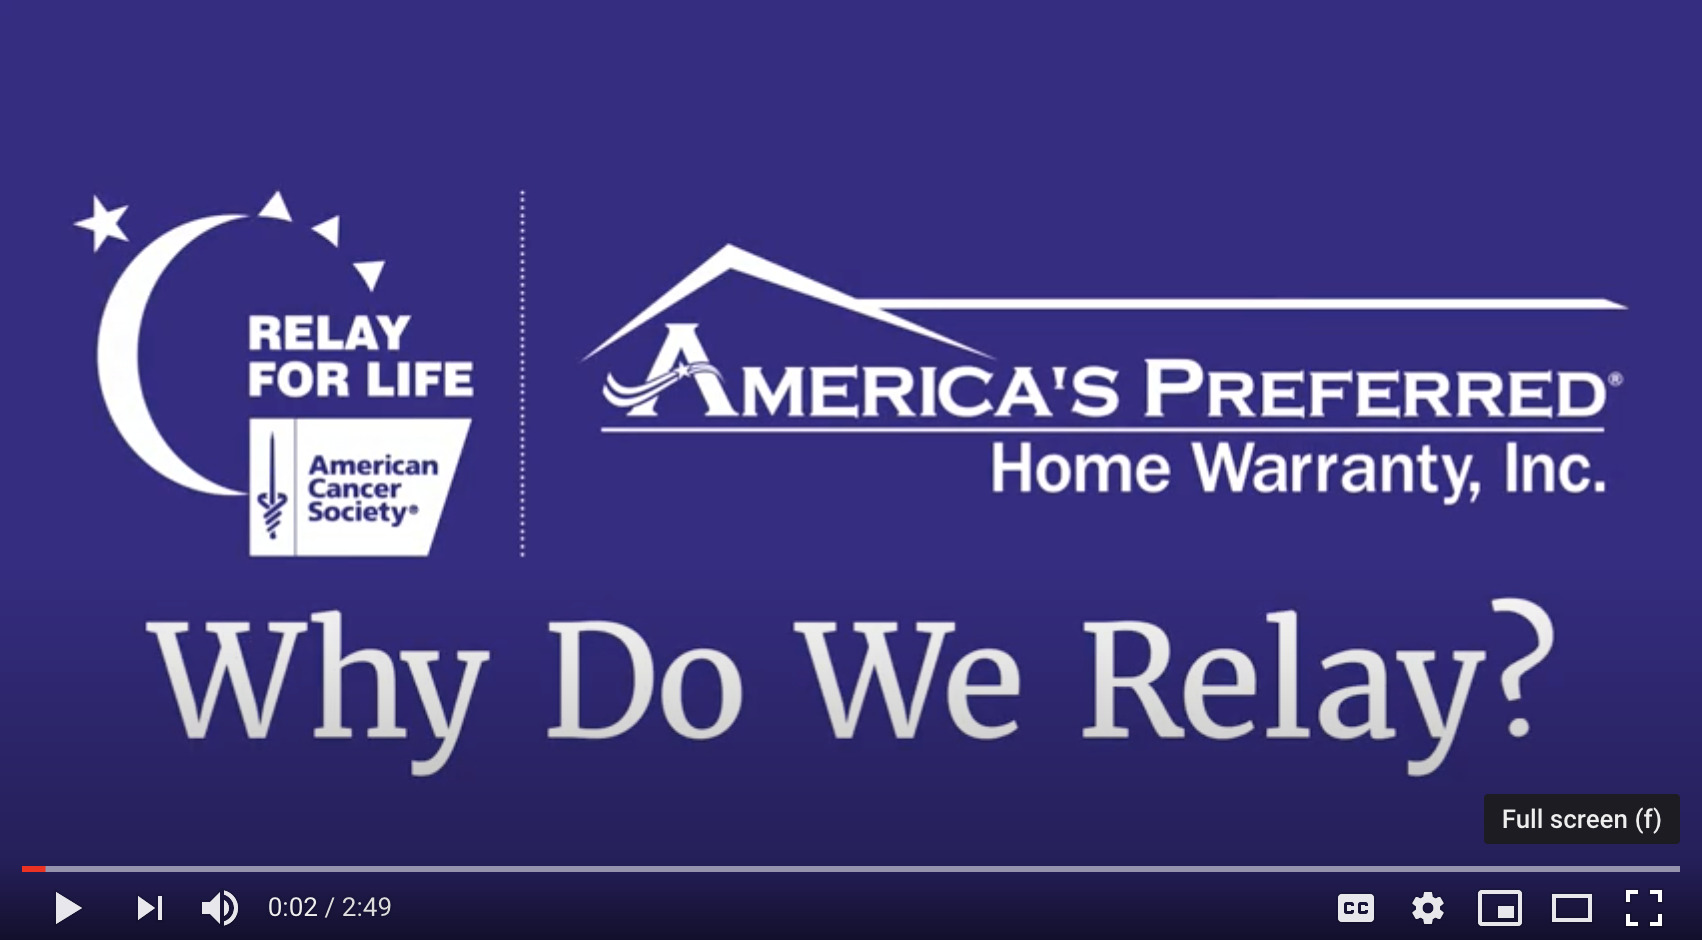 America's Preferred Home Warranty, Relay for Life, Why Do We Relay